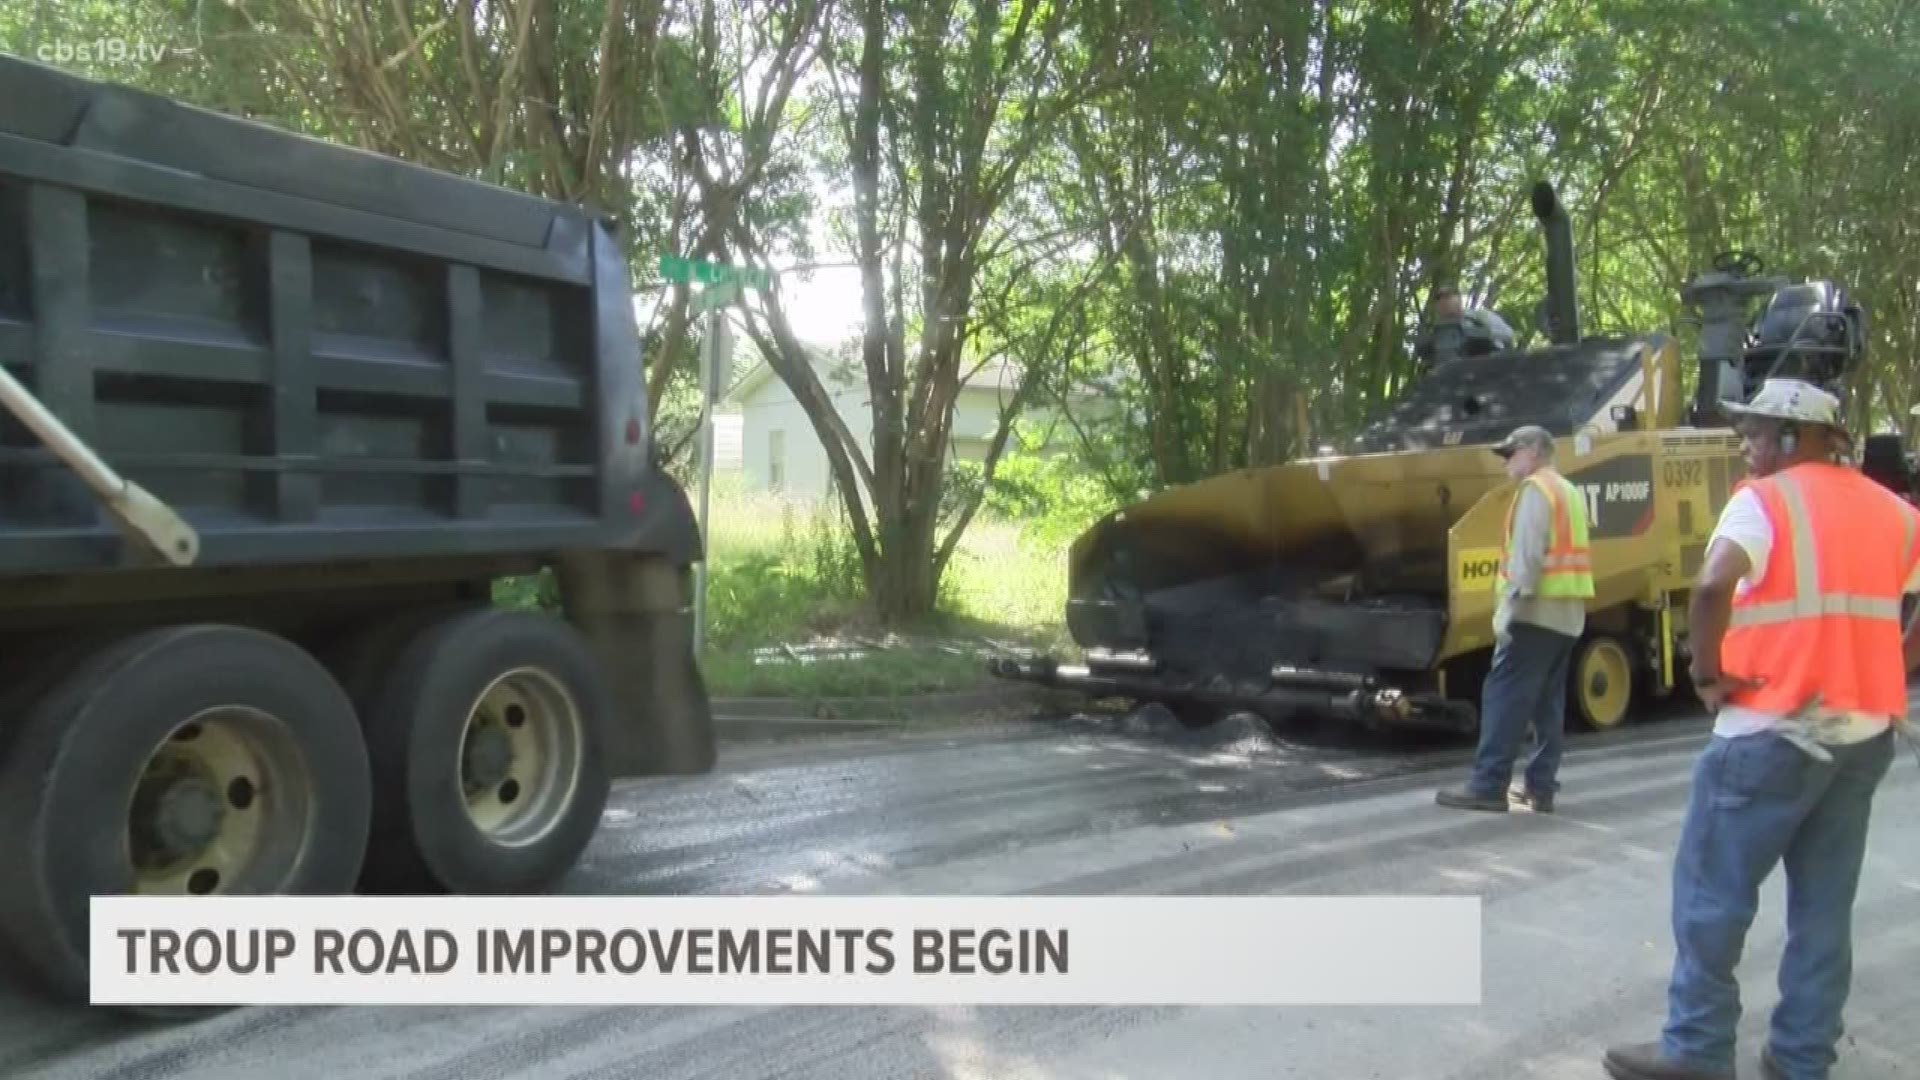 Smith County offered a deal in 2017 for cities within the county to save money repaving their roads.